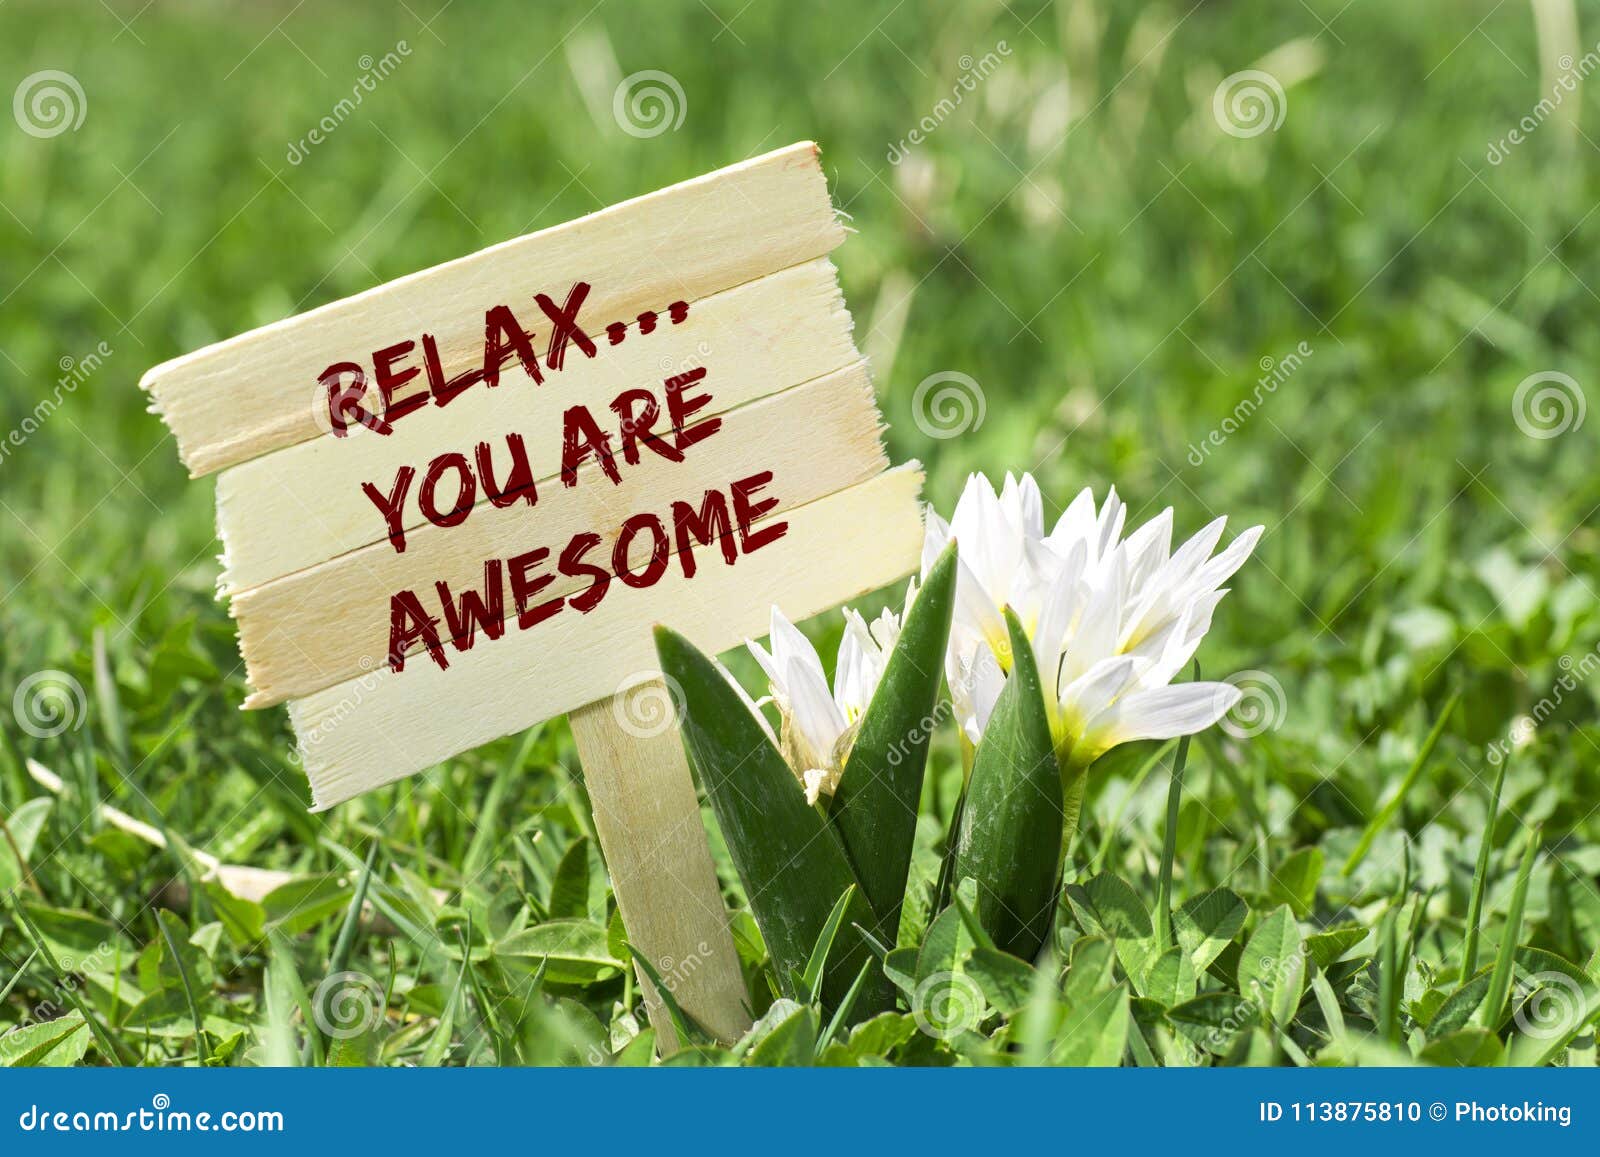 relax you are awesome